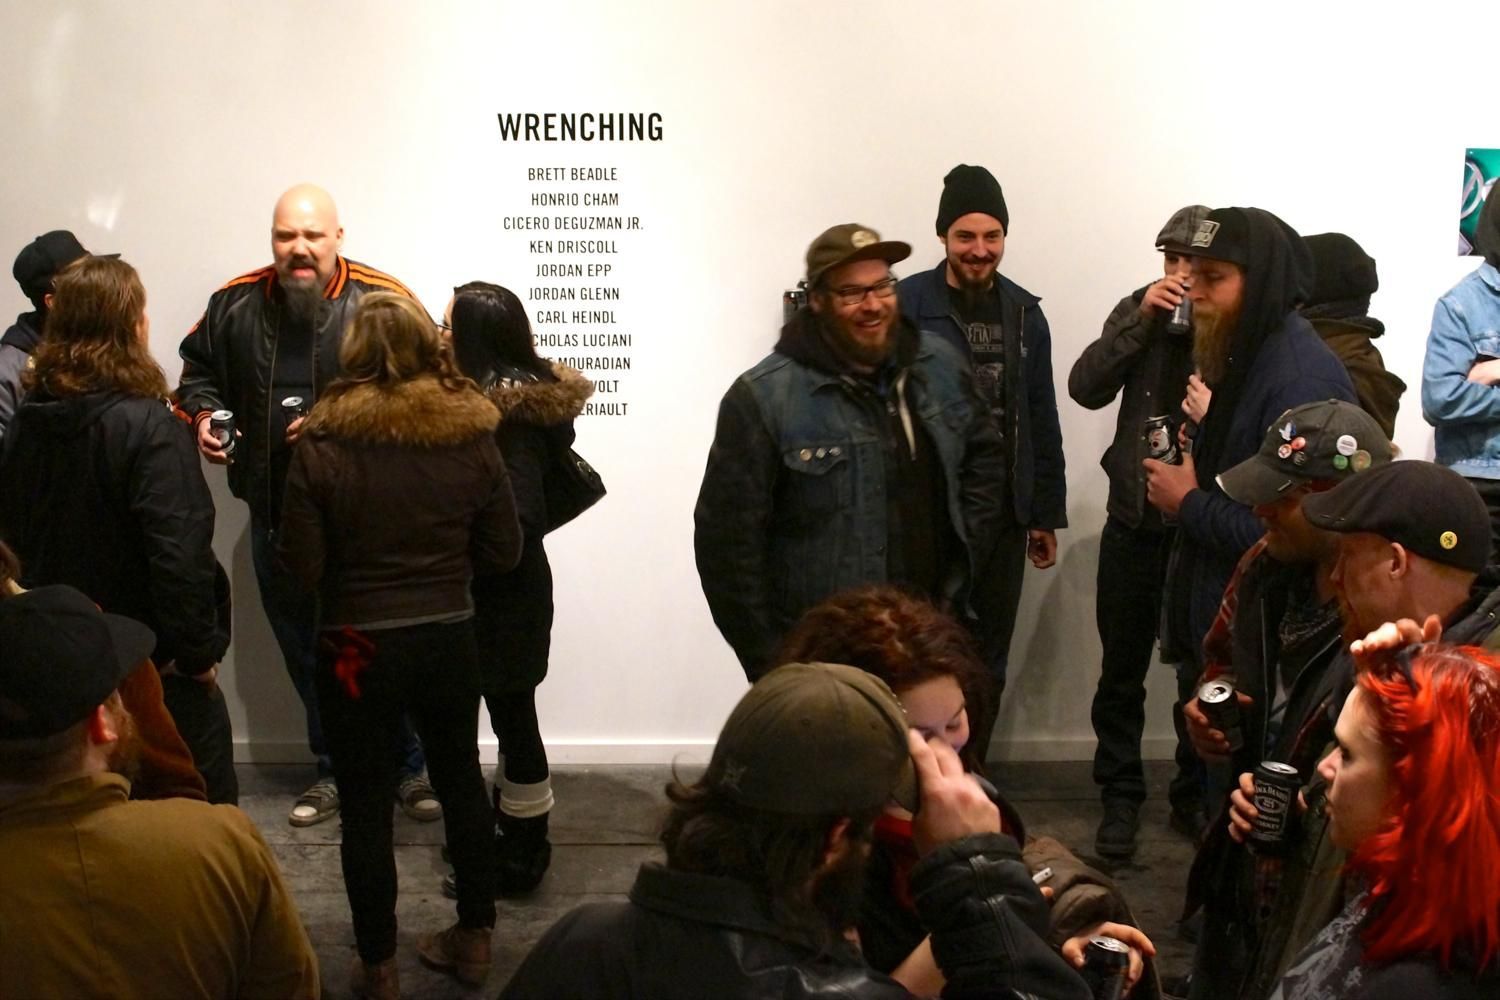 WRENCHING brought motorbike riders out to Friday night's opening.